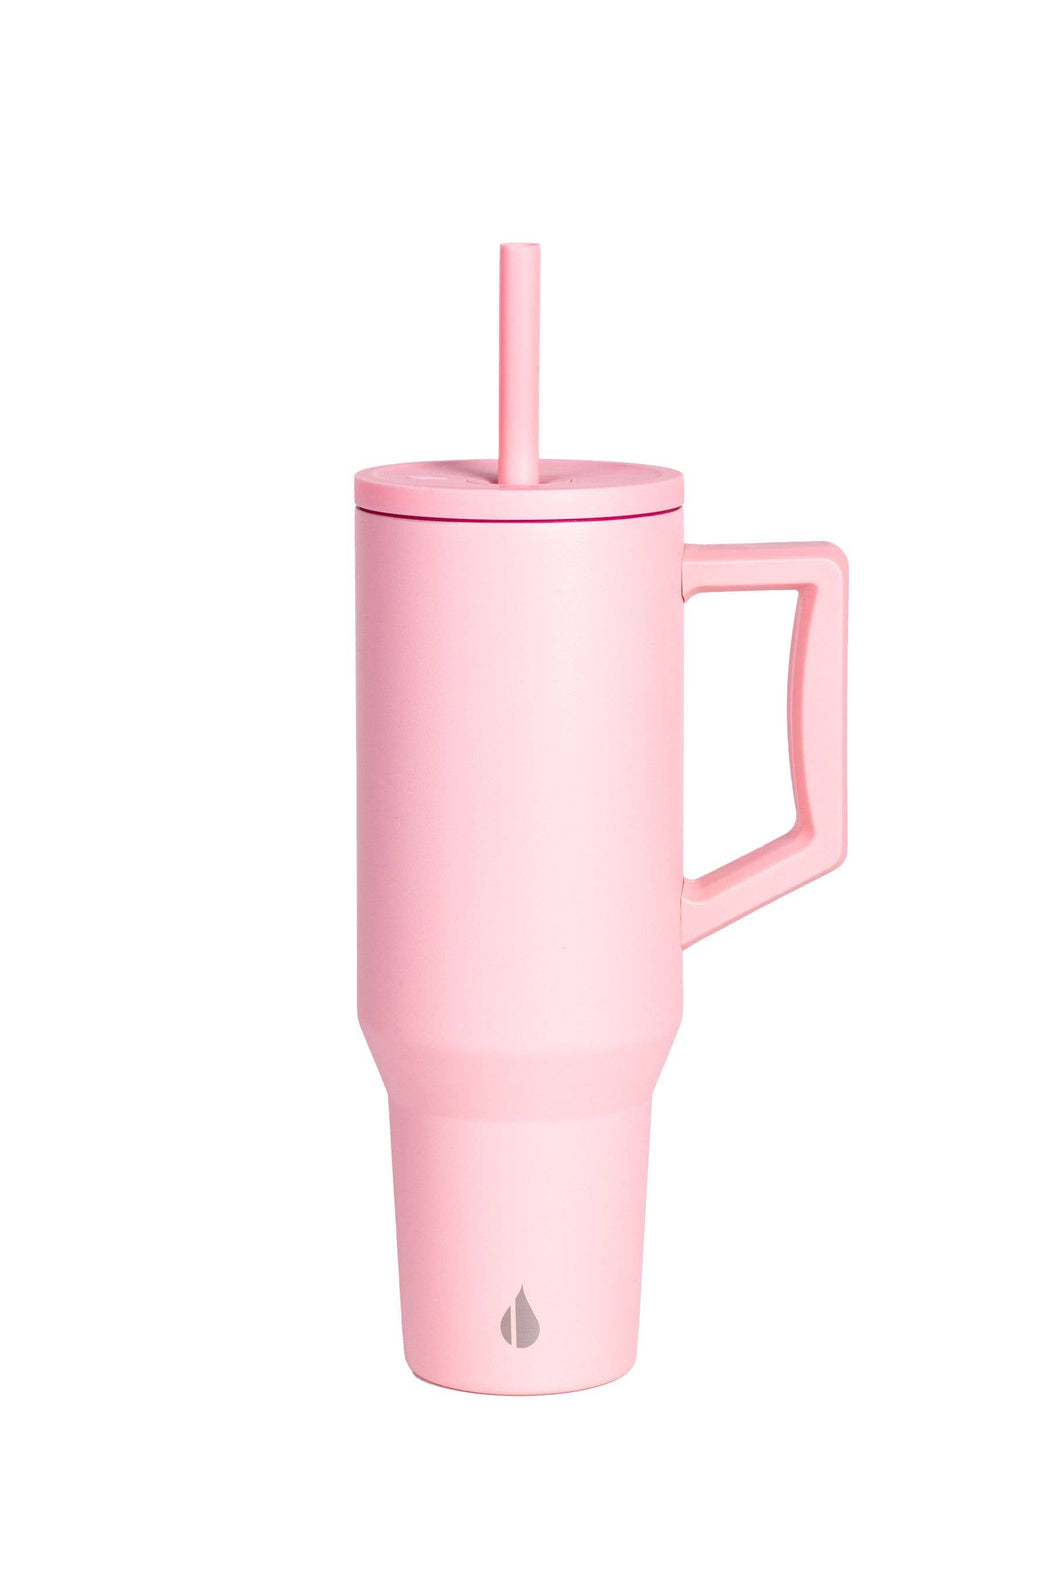 40 oz tumbler with a lid, straw, and handle. It is in the color Rose, which is a beautiful light pink.  